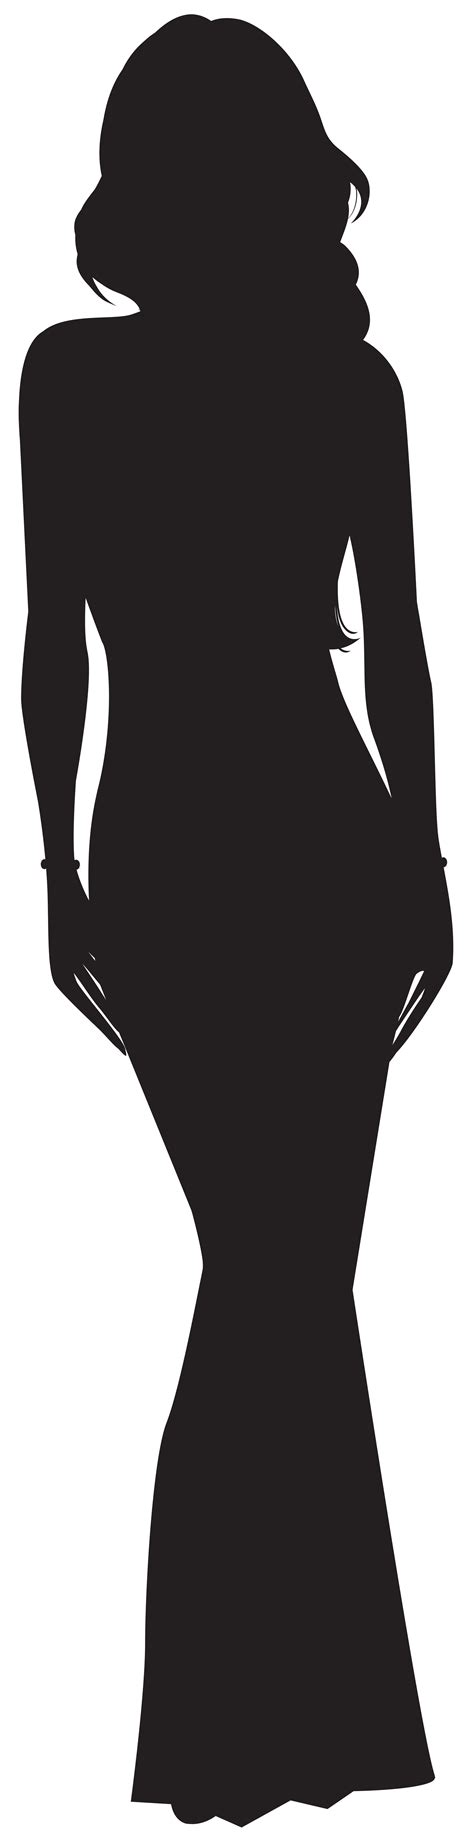 Download Woman Silhouette Female Free Clipart Hq Clipart Png Free C9d